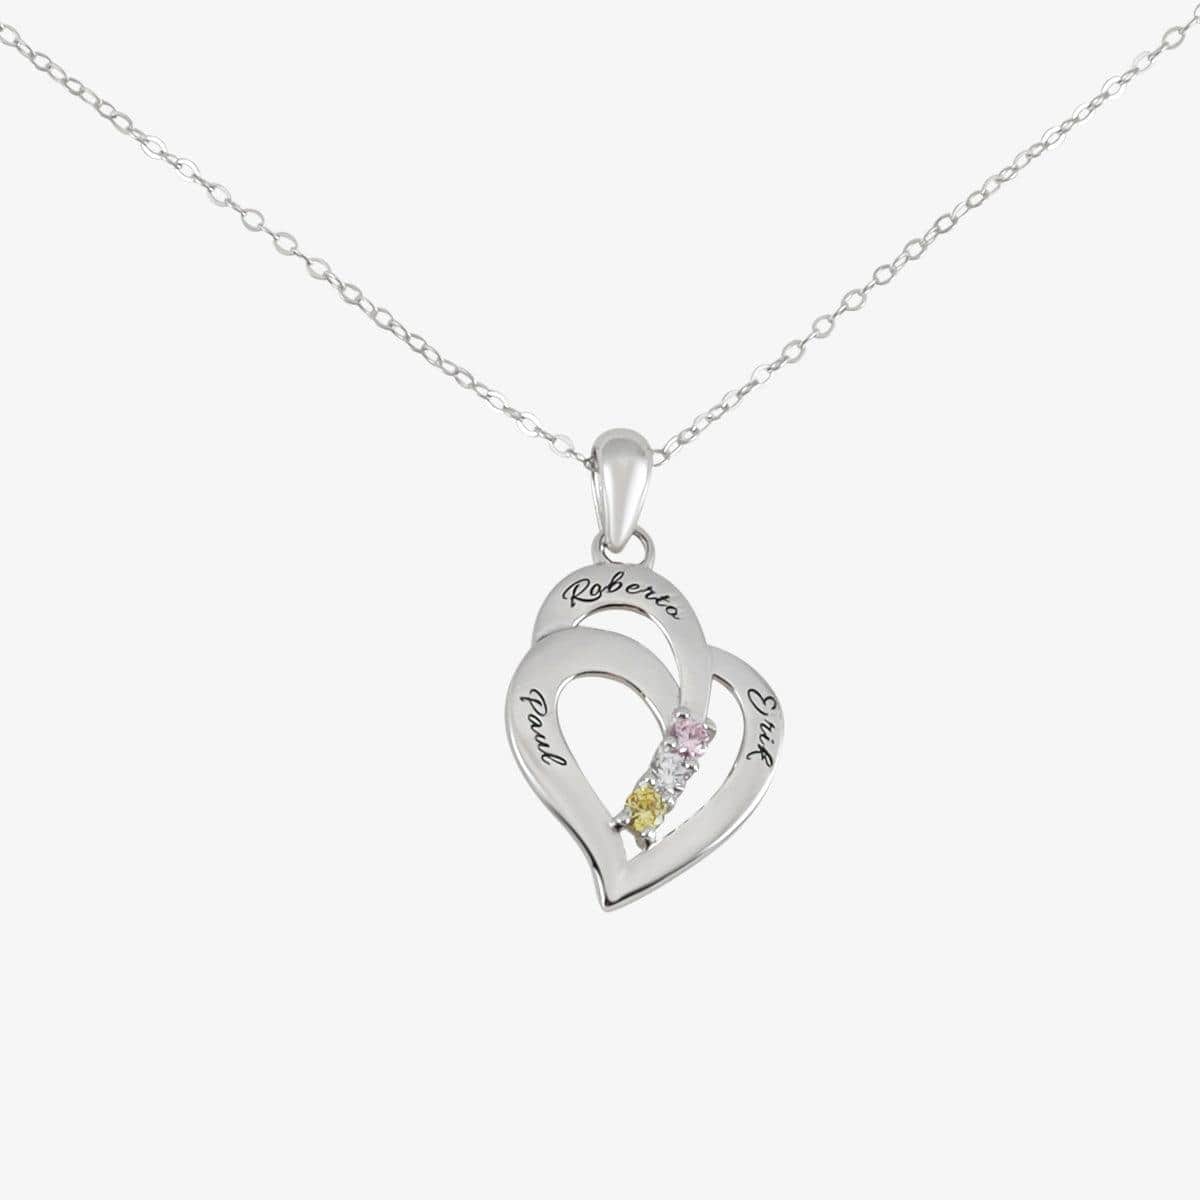 herzschmuck Engraved Necklaces Triple Birthstone & Engraving Heart Necklace